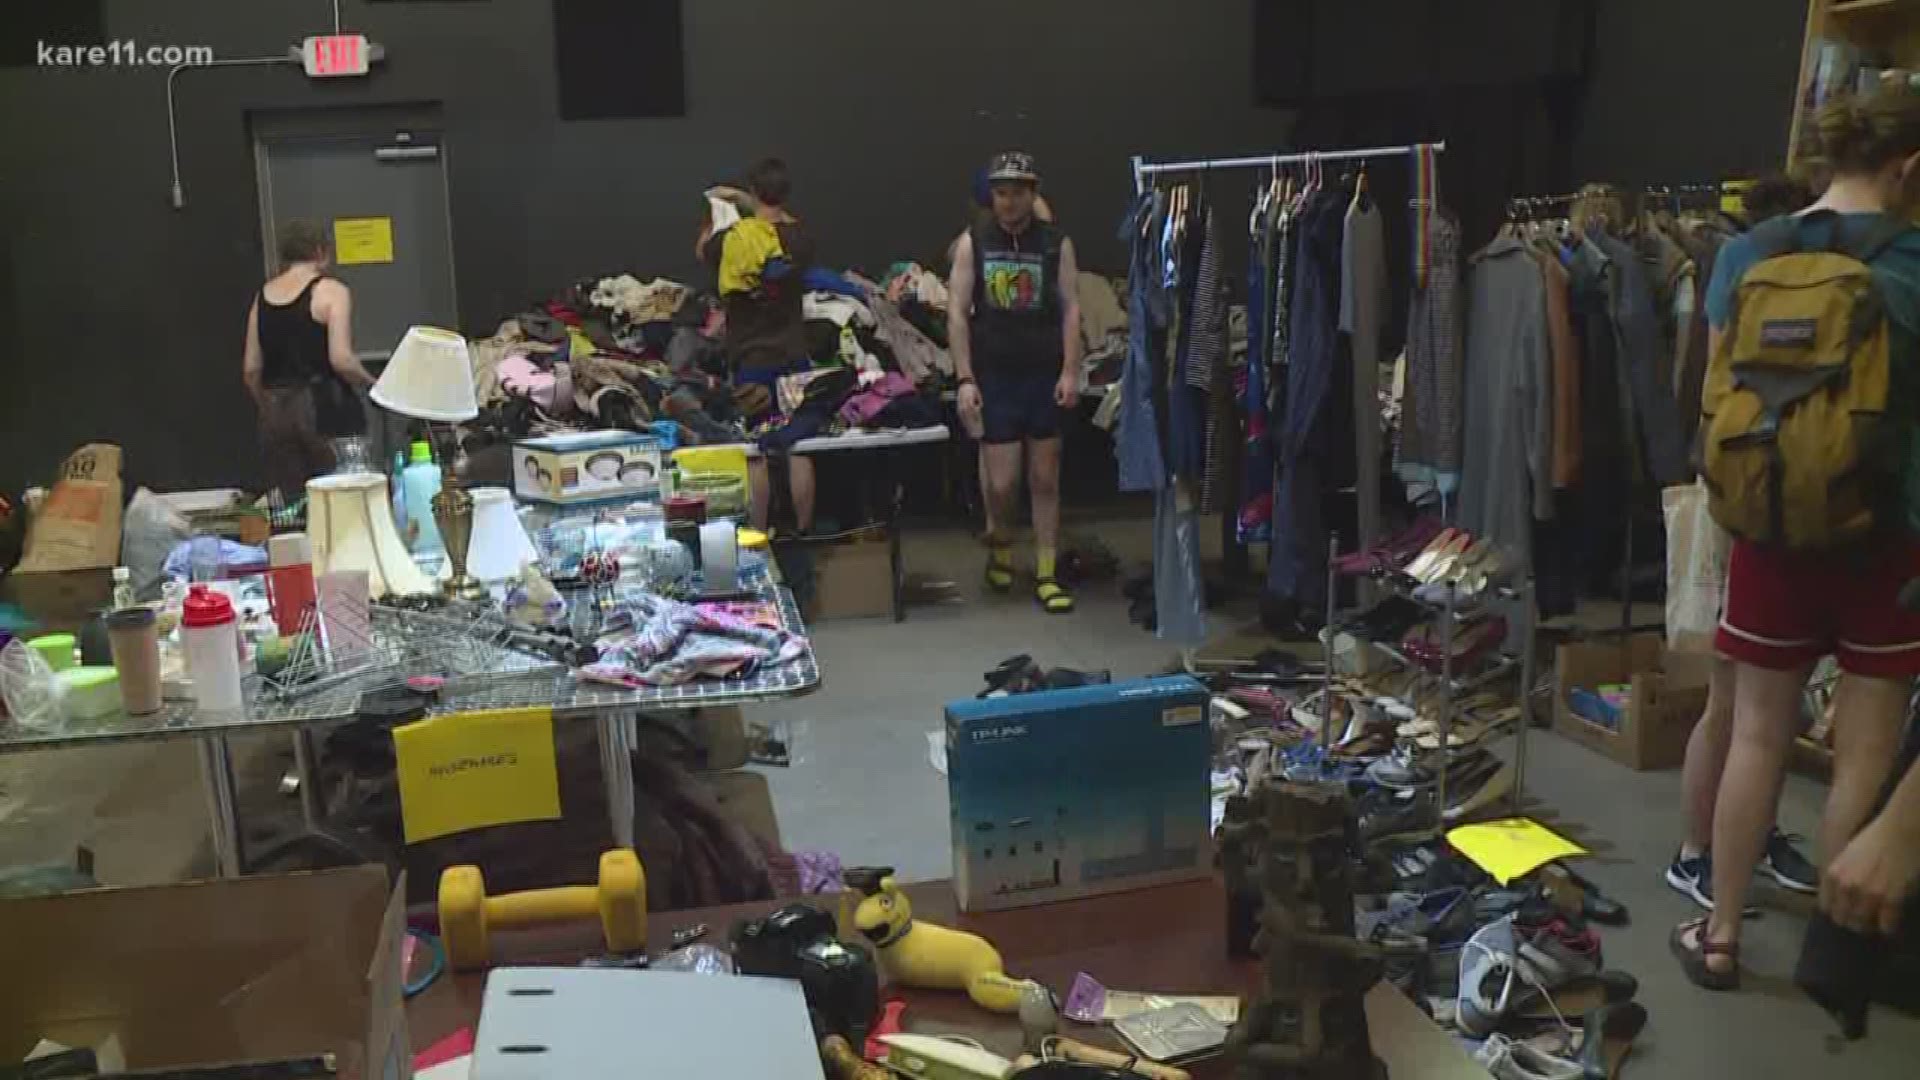 When Alex Uhrich decided to organize a community swap to benefit a local nonprofit, the response was huge. https://kare11.tv/2sjMInd